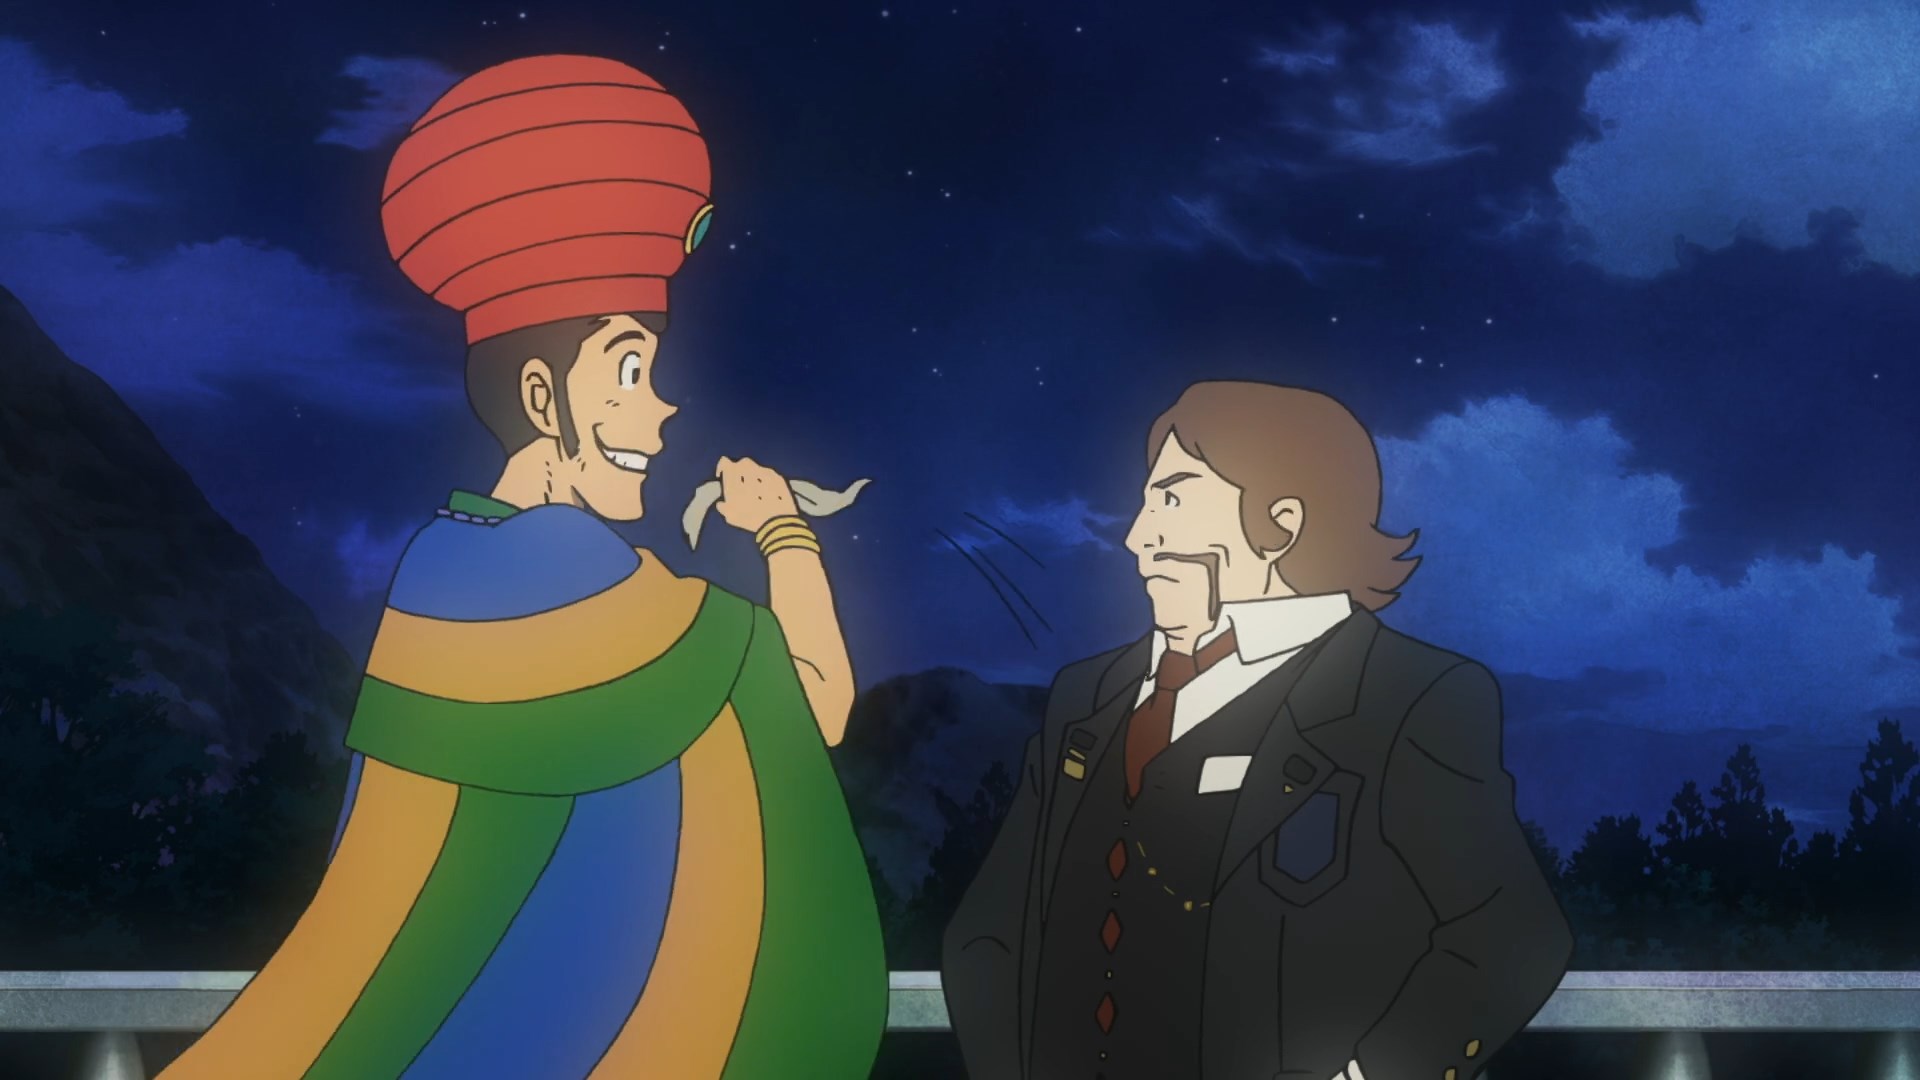 Lupin The Third Part 6 03 Ticket Heist Lupin6 Astronerdboy S Anime Manga Blog Astronerdboy S Anime Manga Blog